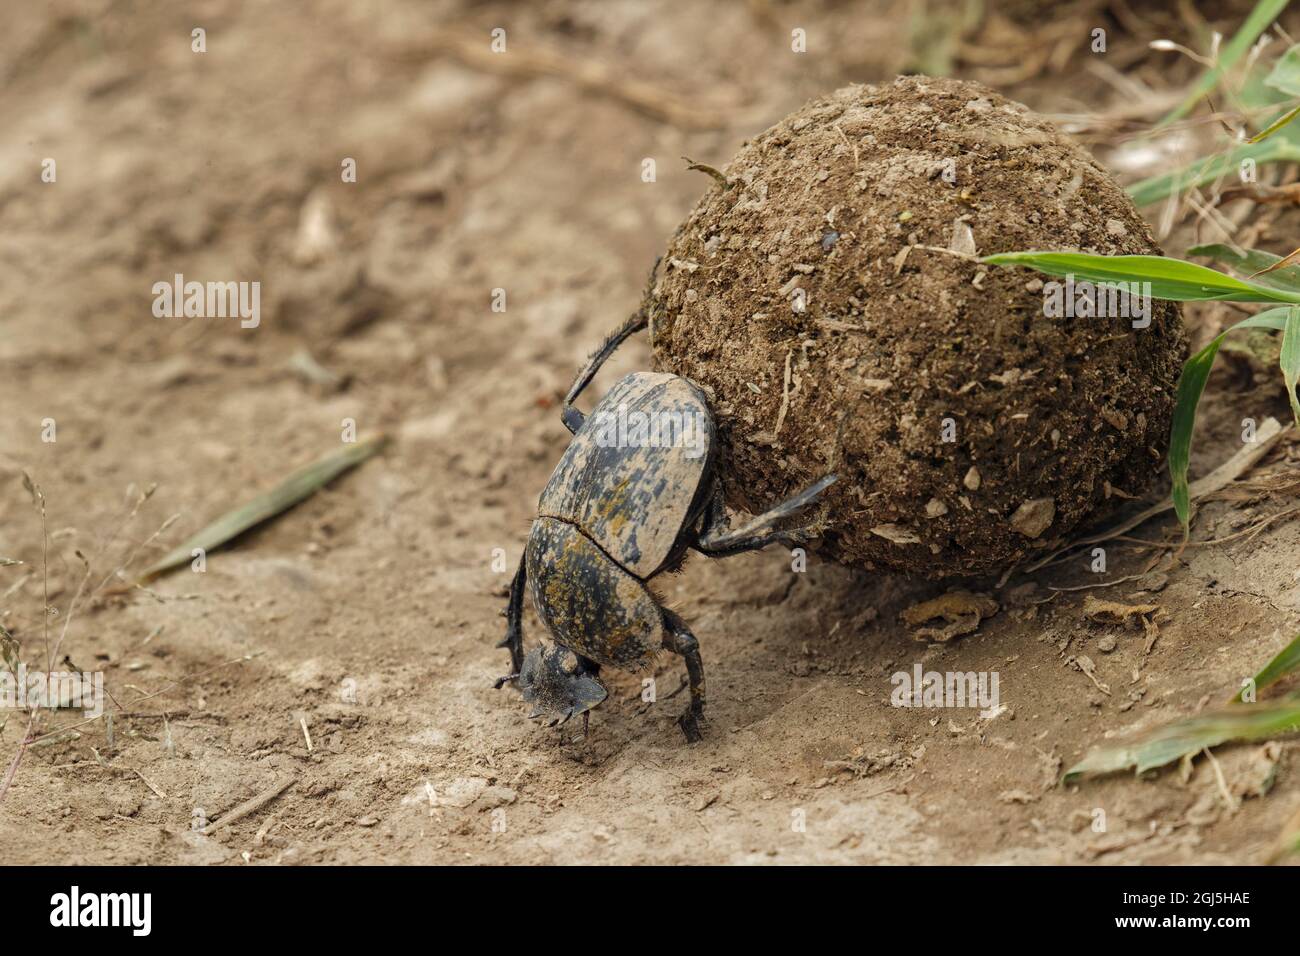 Dung beetle rolling a ball of elephant dung, Serengeti National Park, Tanzania, Africa Stock Photo